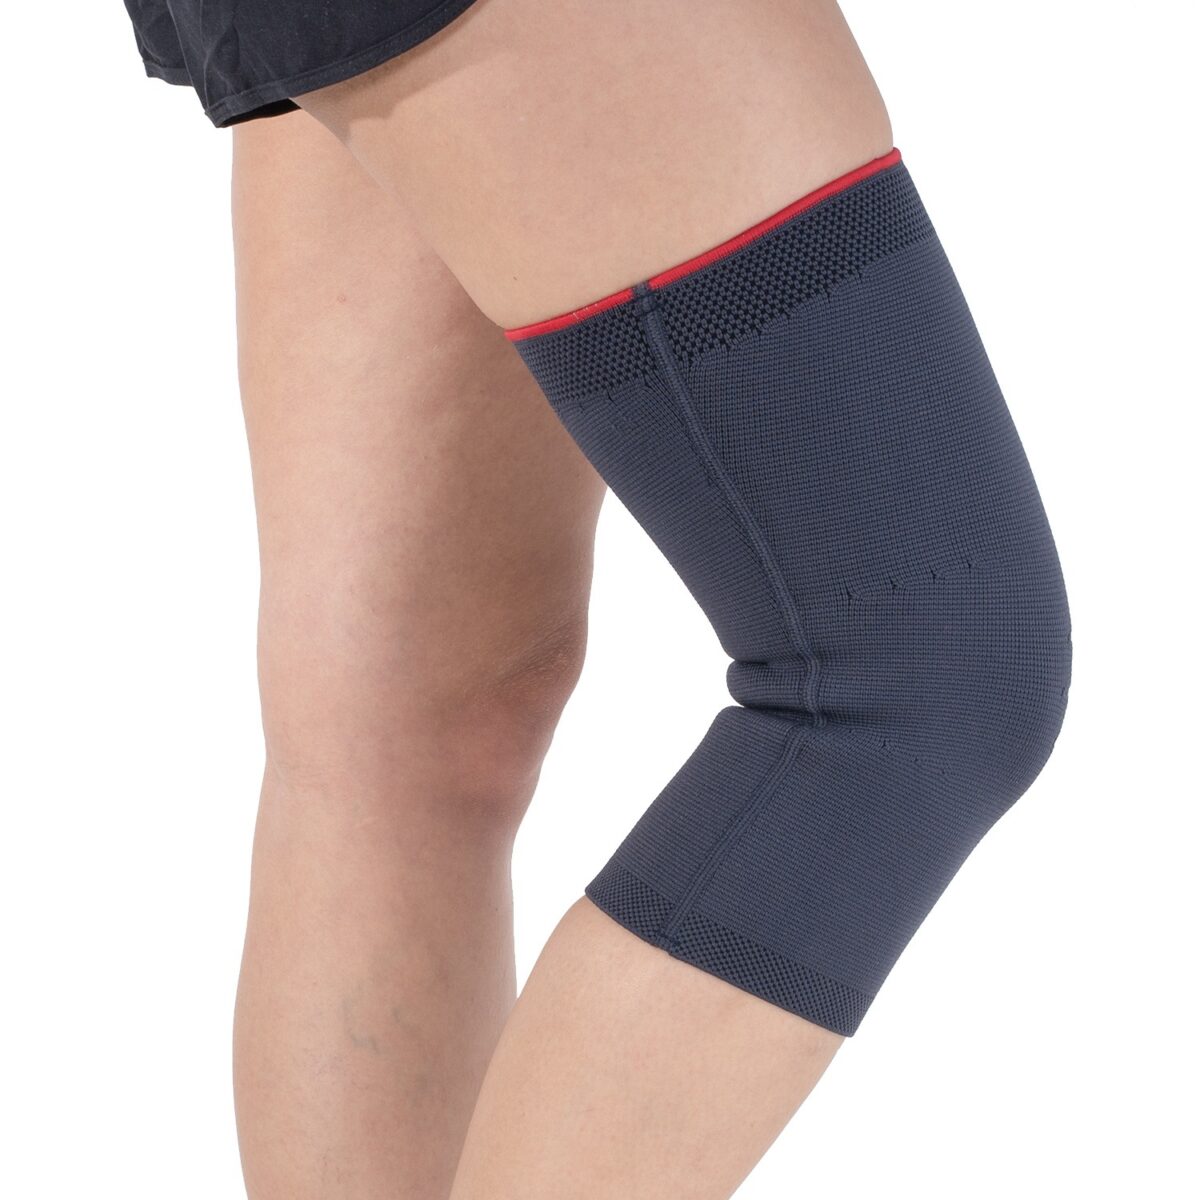 wingmed orthopedic equipments W501 woven knee support 88